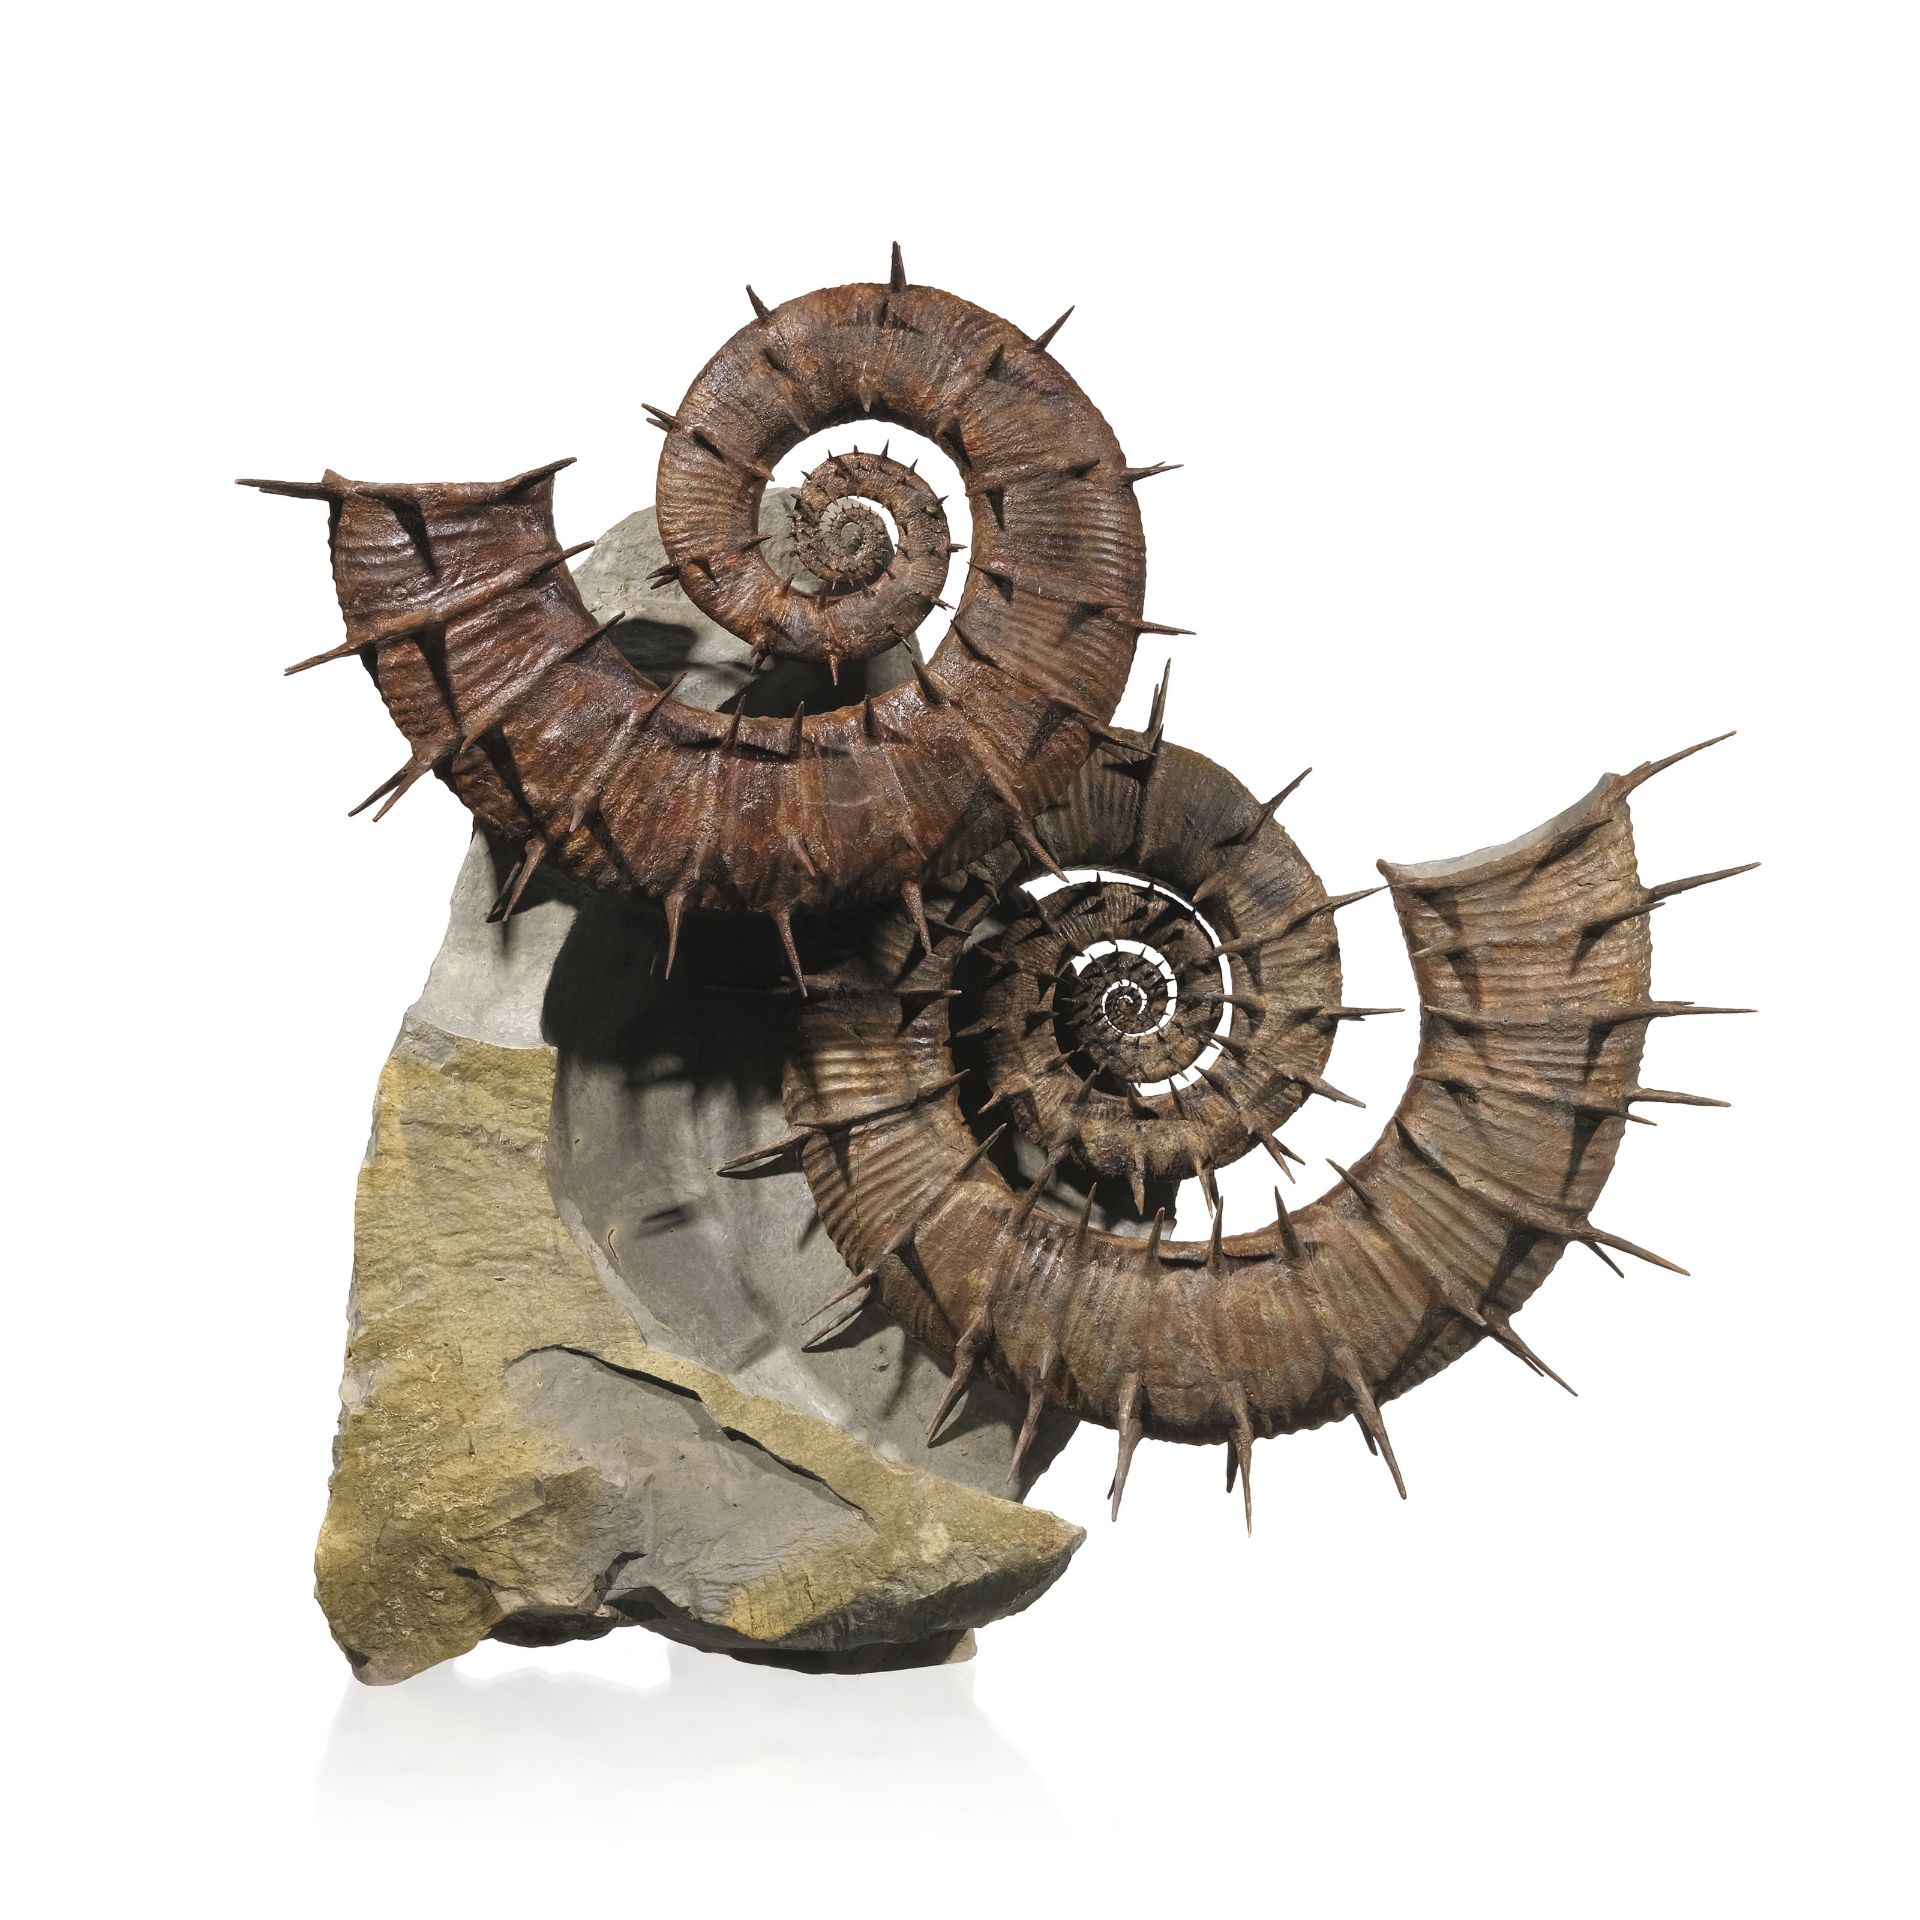 Two large Spiny Ammonite from Southern France, Crioceras